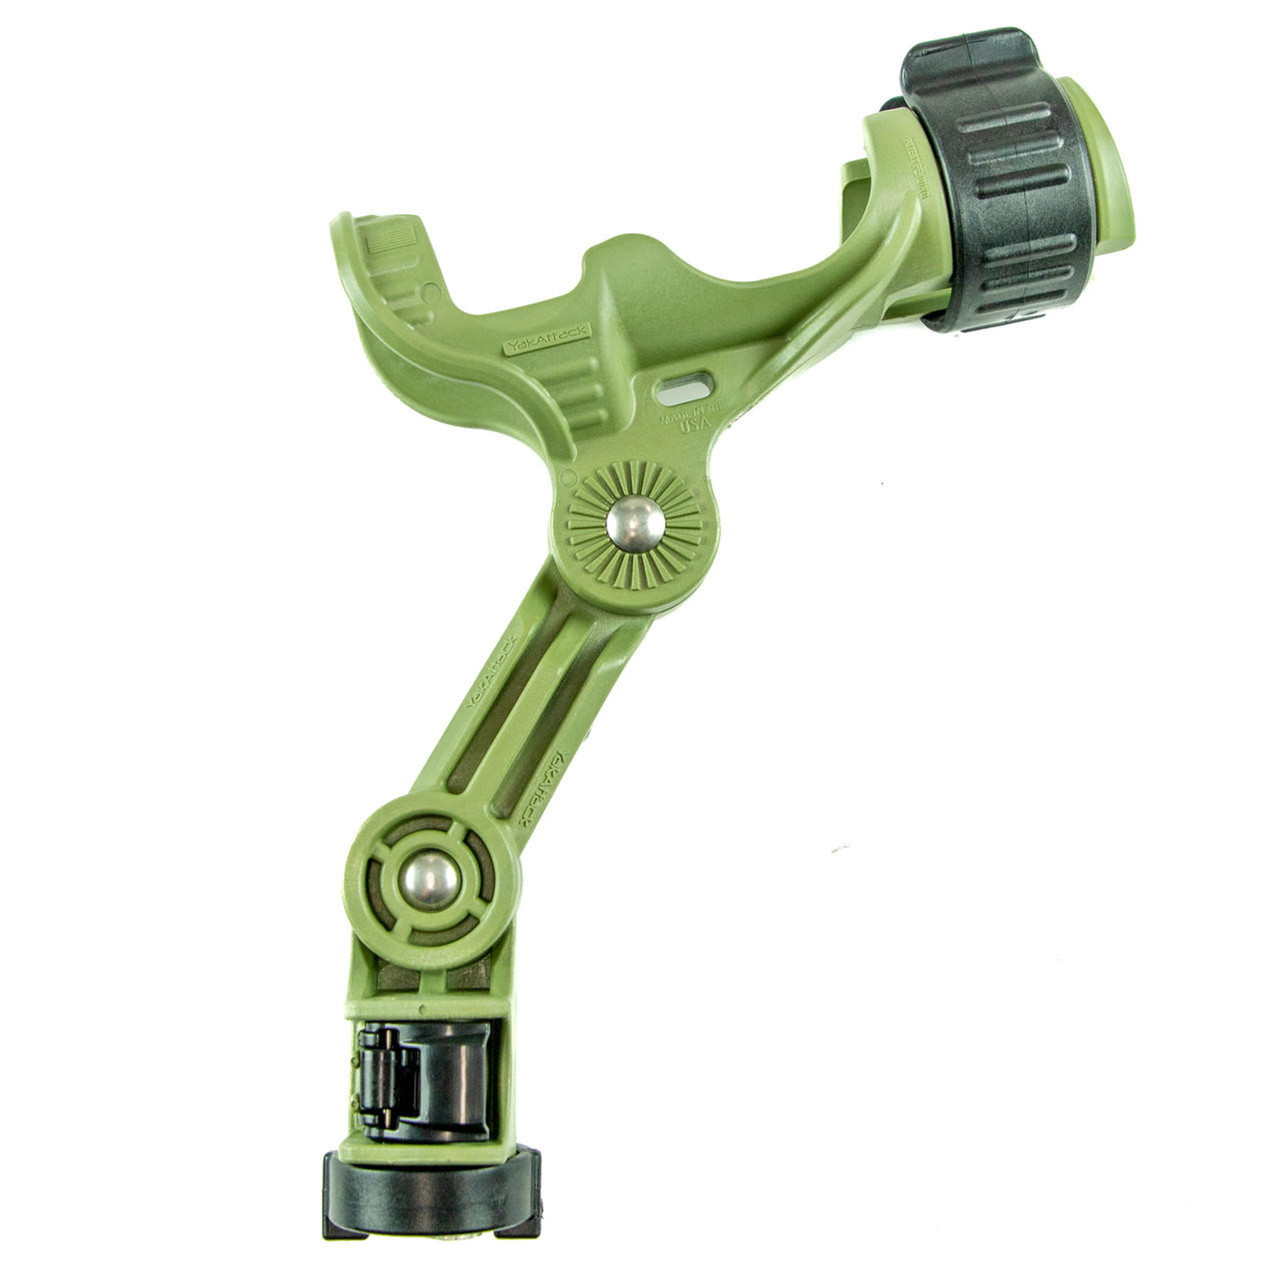 https://cdn11.bigcommerce.com/s-aosb35/images/stencil/1280x1280/products/1780/10646/omega-pro-rod-holder-with-track-mounted-locknload-mounting-system-olive-green-rhm-1002-og__02645__61135.1679689154.jpg?c=3